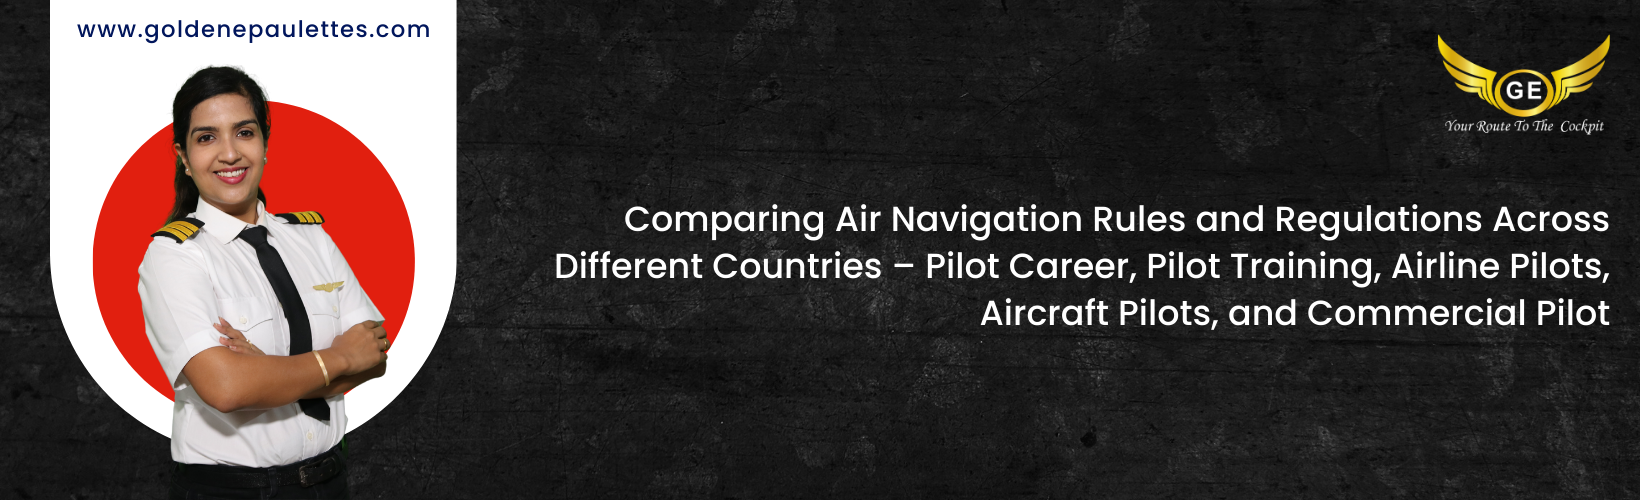 Air Navigation in Different Countries